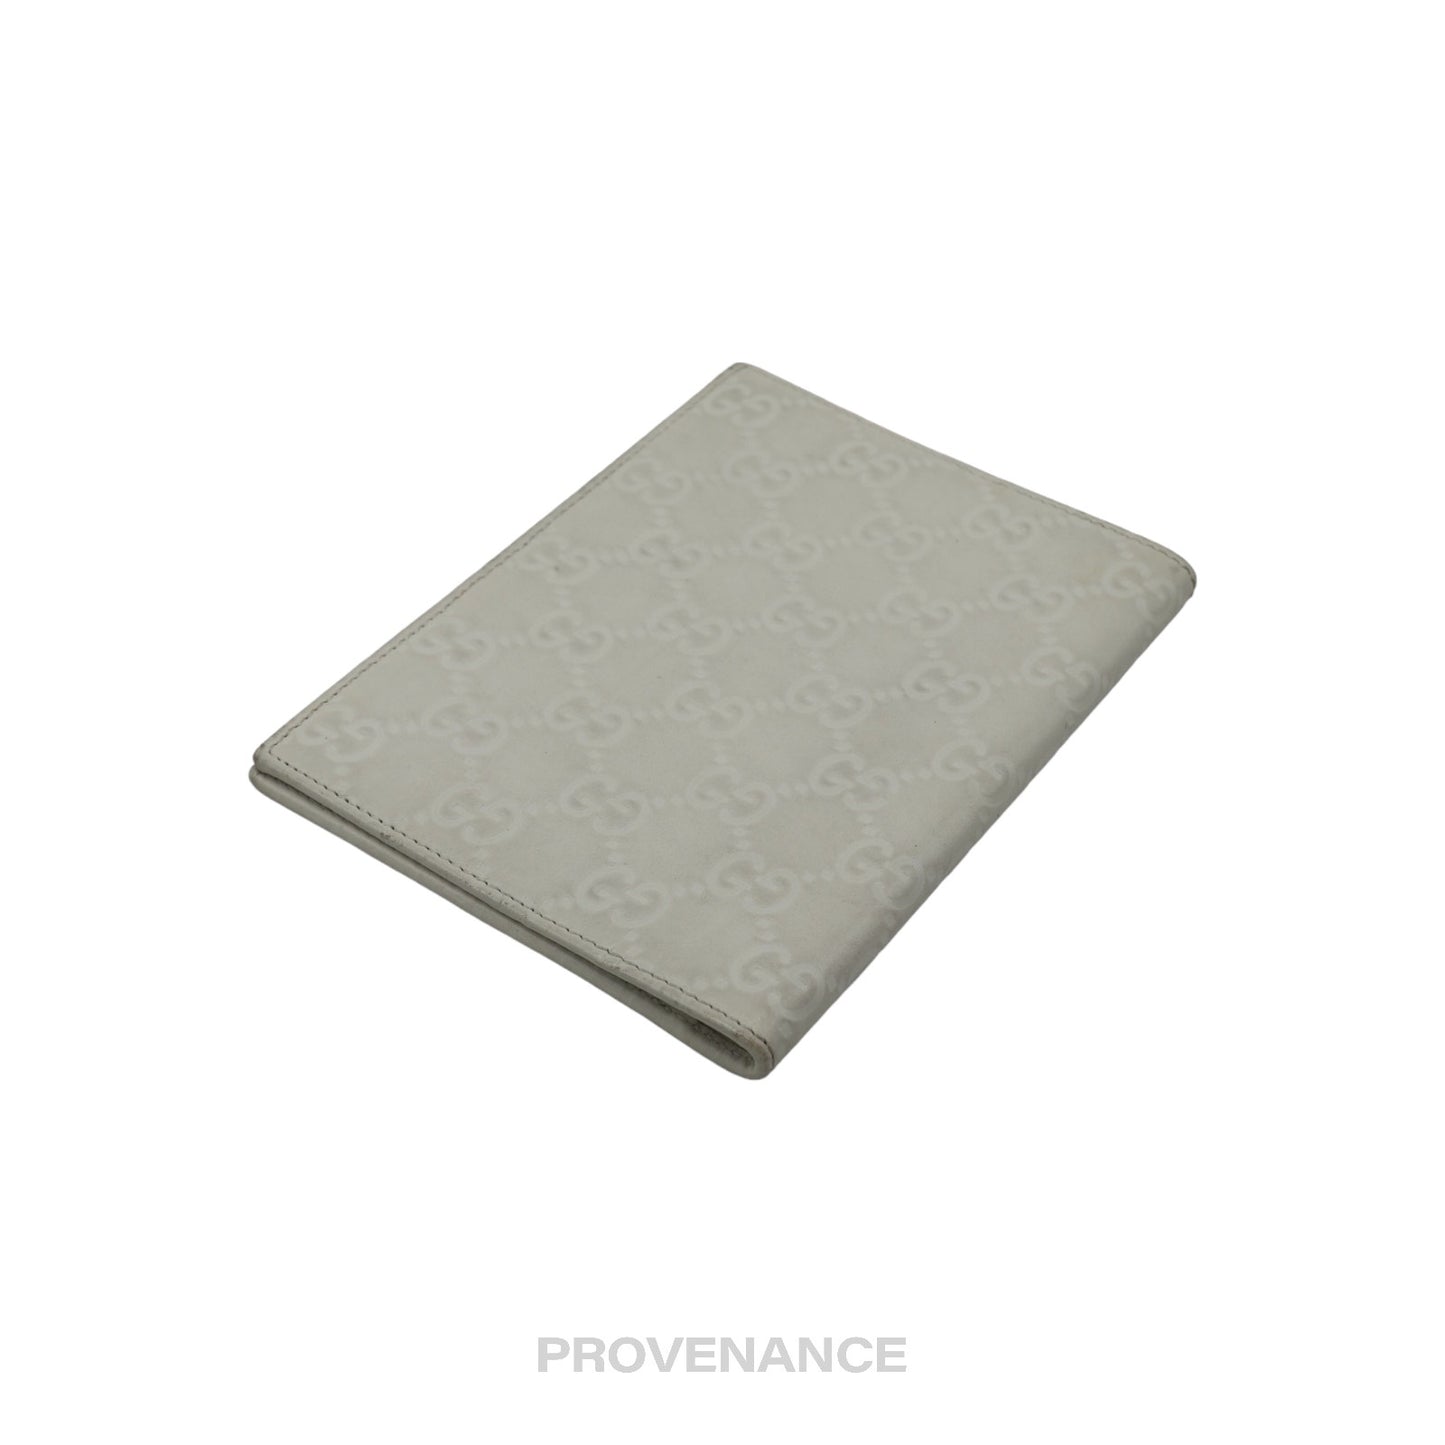 🔴 Gucci Notebook Cover - Ivory Guccissima Leather